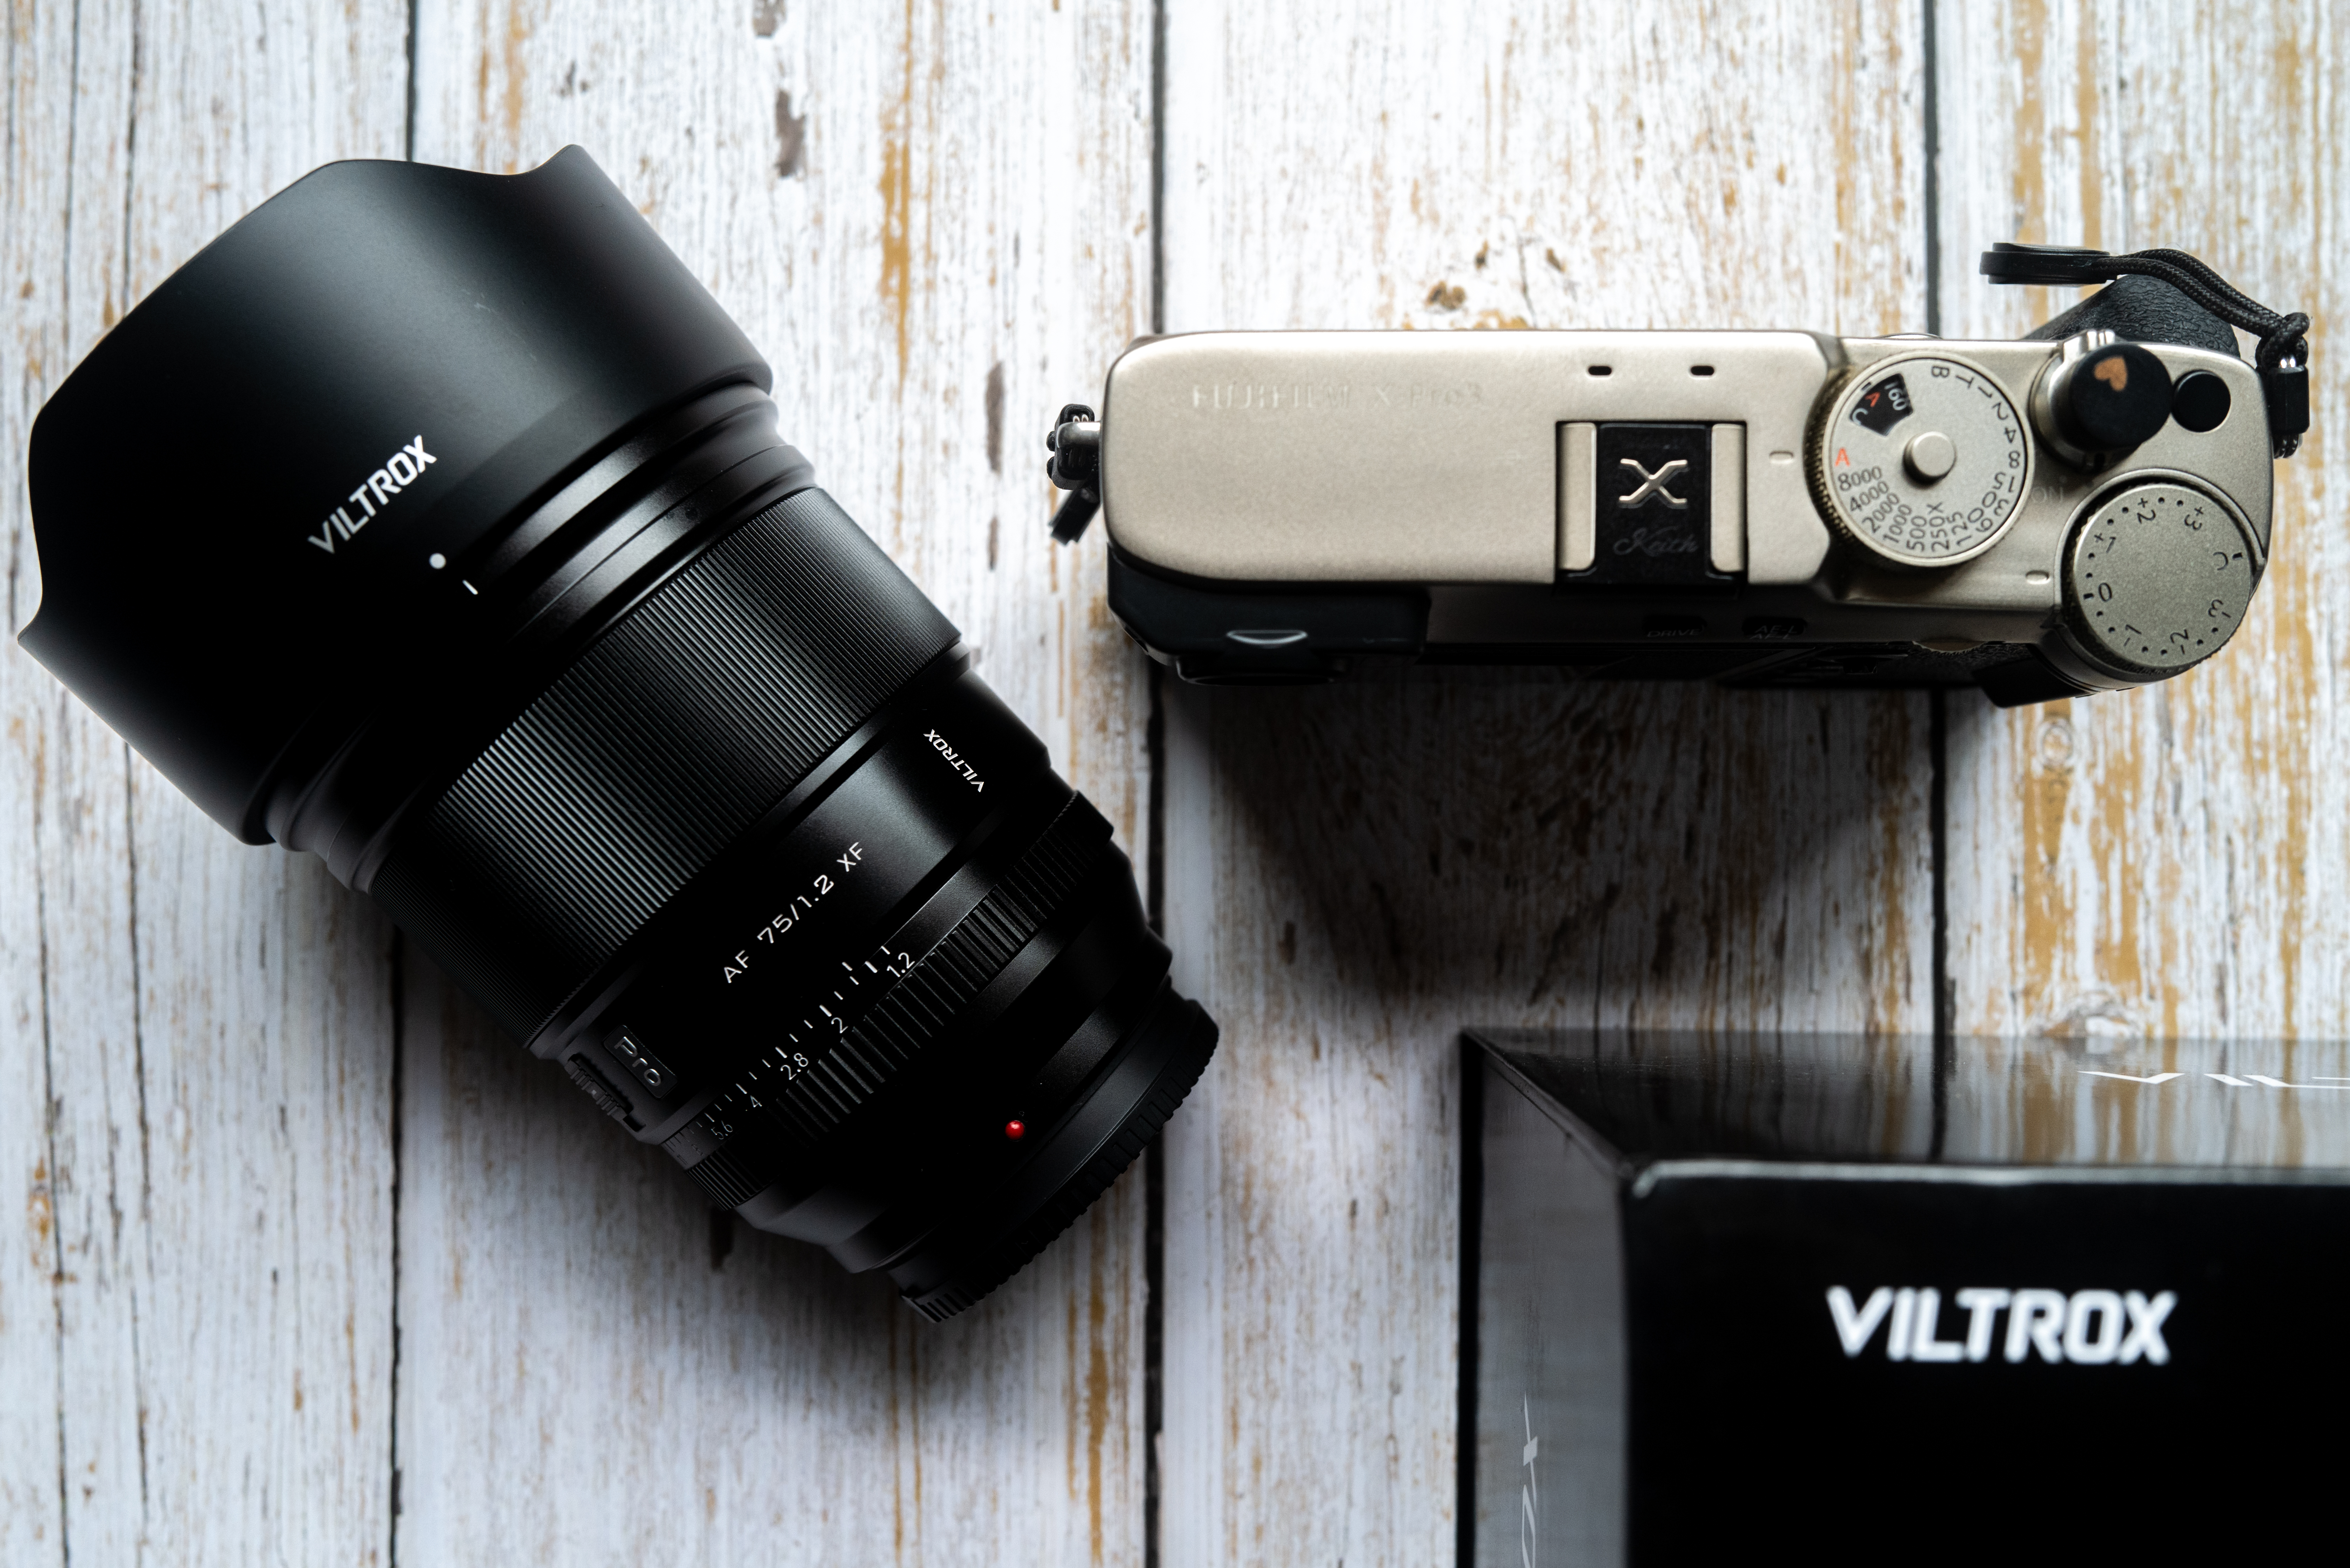 Viltrox 75mm F1.2 Pro Review – In a league of its own – KeithWee